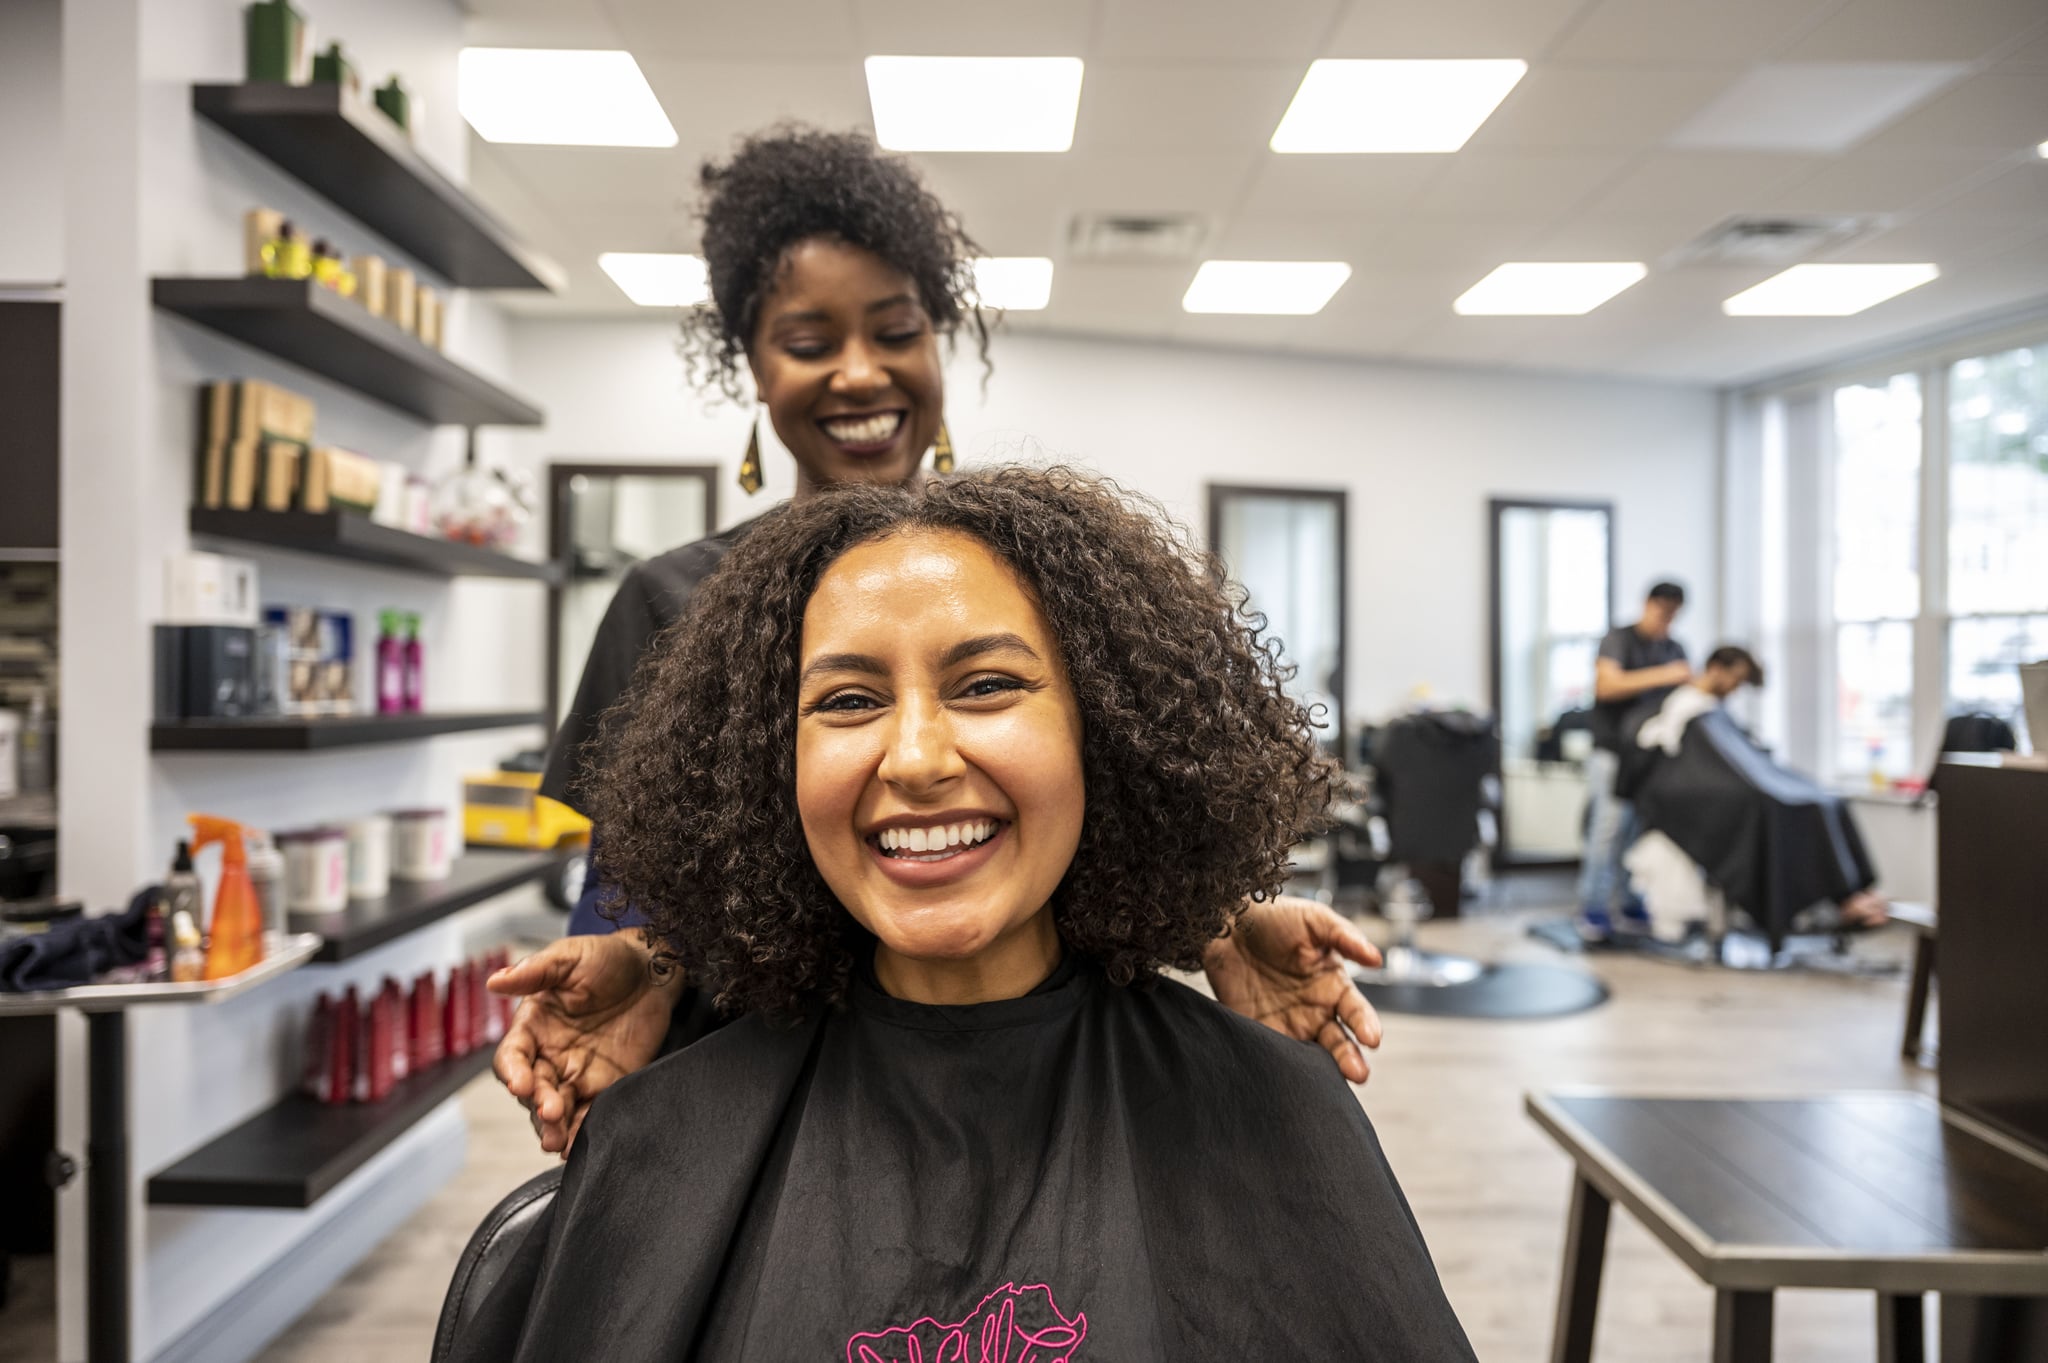 Oyster Bay, N.Y.: Elizabeth Rabanal, curl expert and founder of Curly Culture Salon, works on Sara Khalil's naturally curly hair on Sept. 19, 2021 in Oyster Bay, New York. (Photo by Alejandra Villa Loraca/Newsday RM via Getty Images)